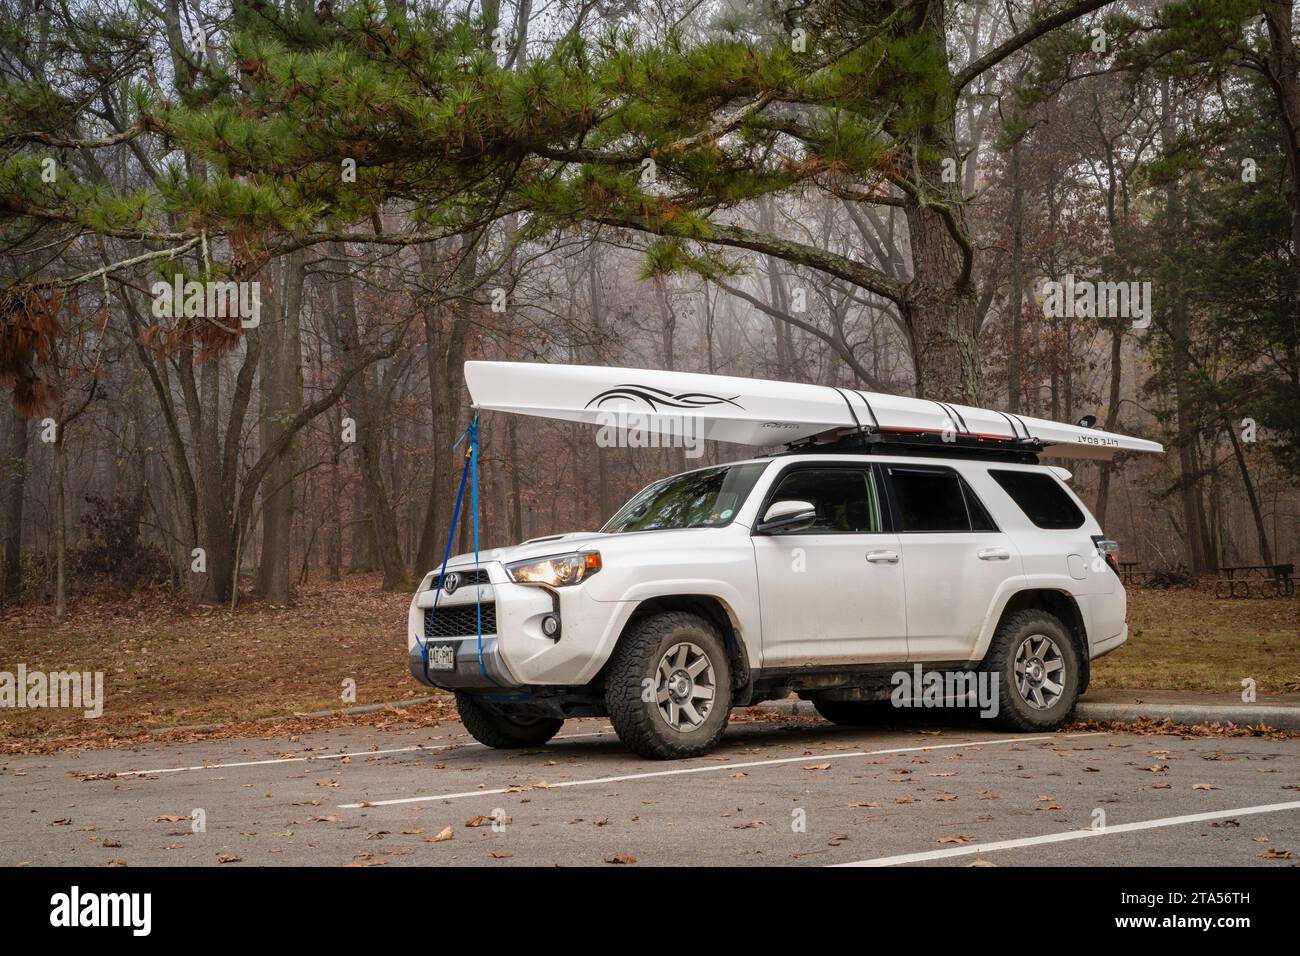 Colbert Ferry Park, AL, USA - November 23, 2023: Toyota 4runner SUV with a rowing shell, LiteRace 1x by Liteboat on roof racks, November morning on a Stock Photo